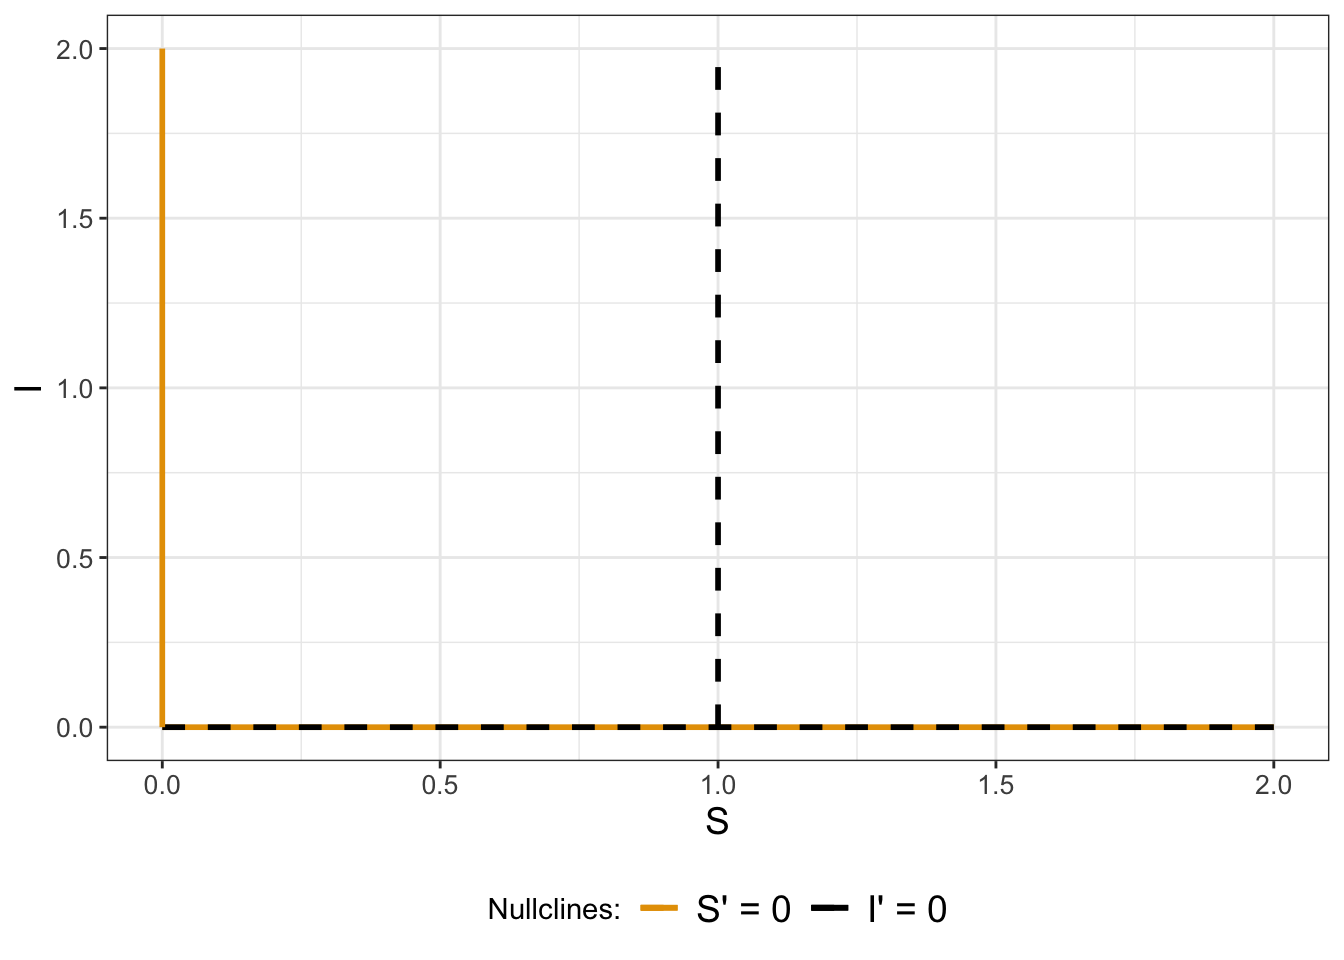 Nullclines for Equation \@ref(eq:flu-quarantine-small-06). To generate the plot we assumed $\beta=1$ and $k=1$.